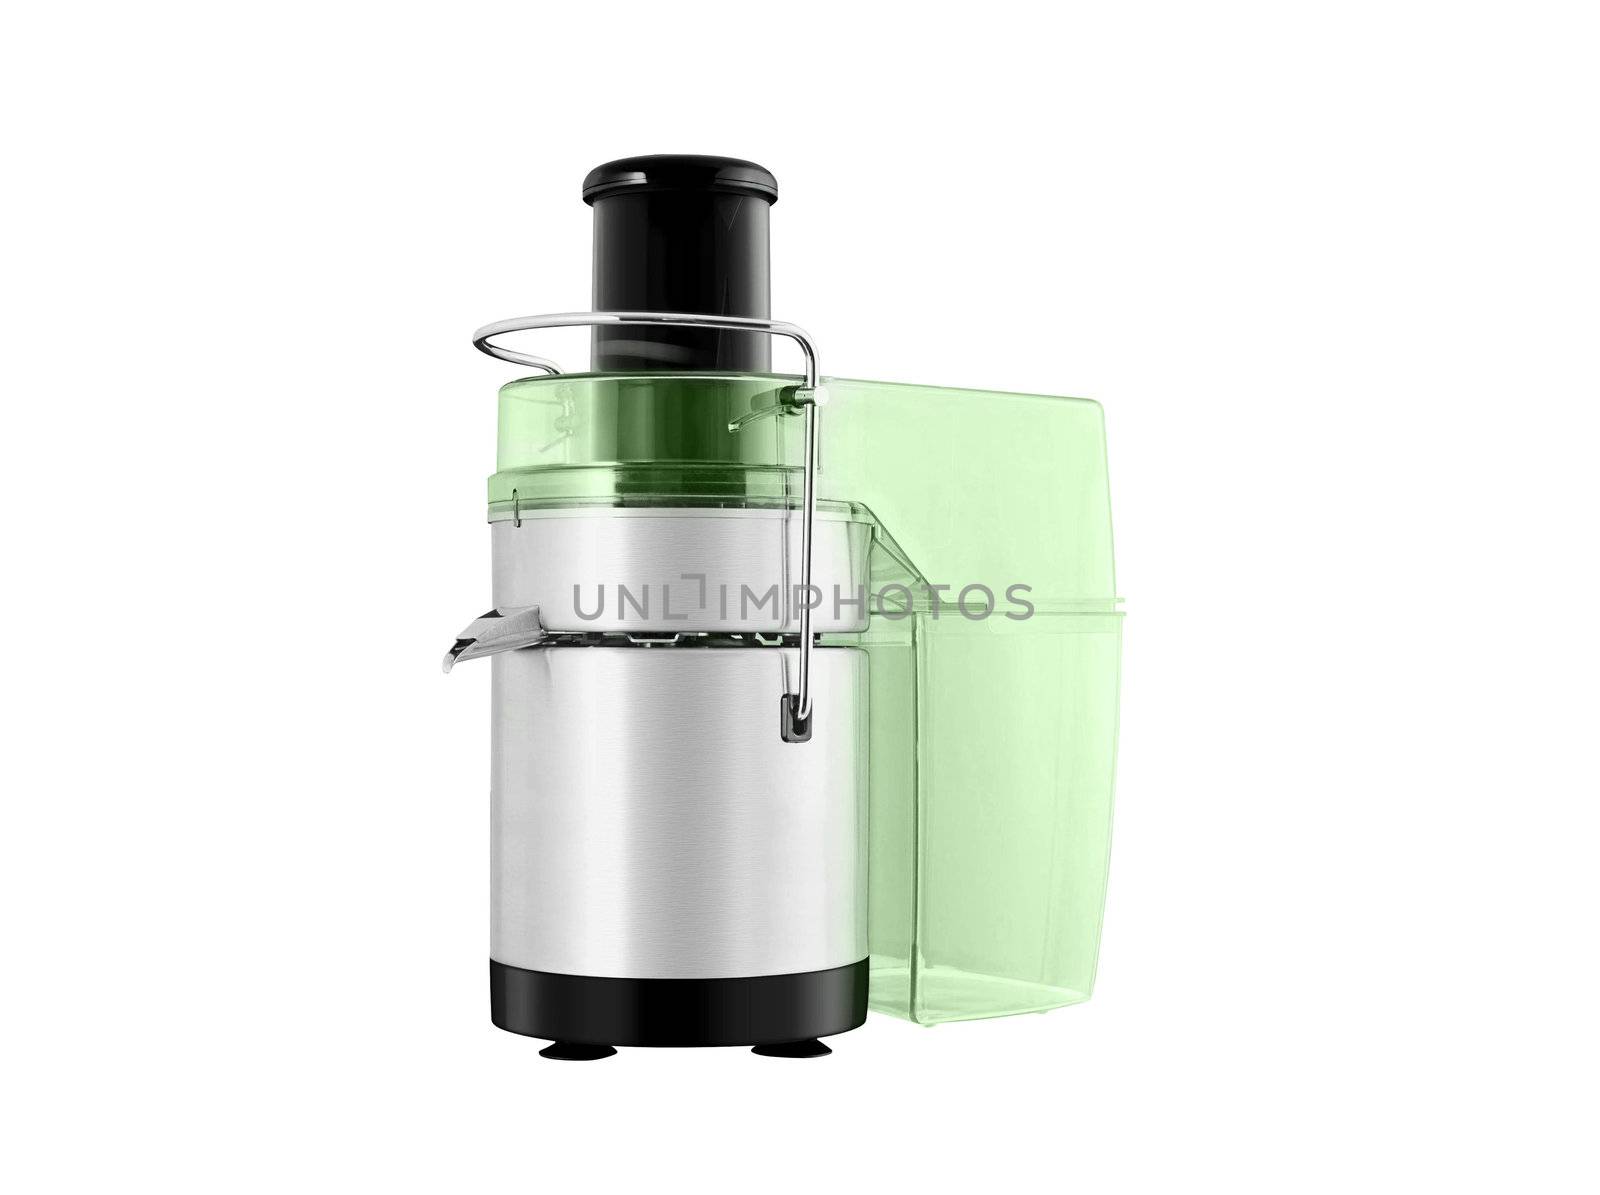 Food processor isolated on a white background